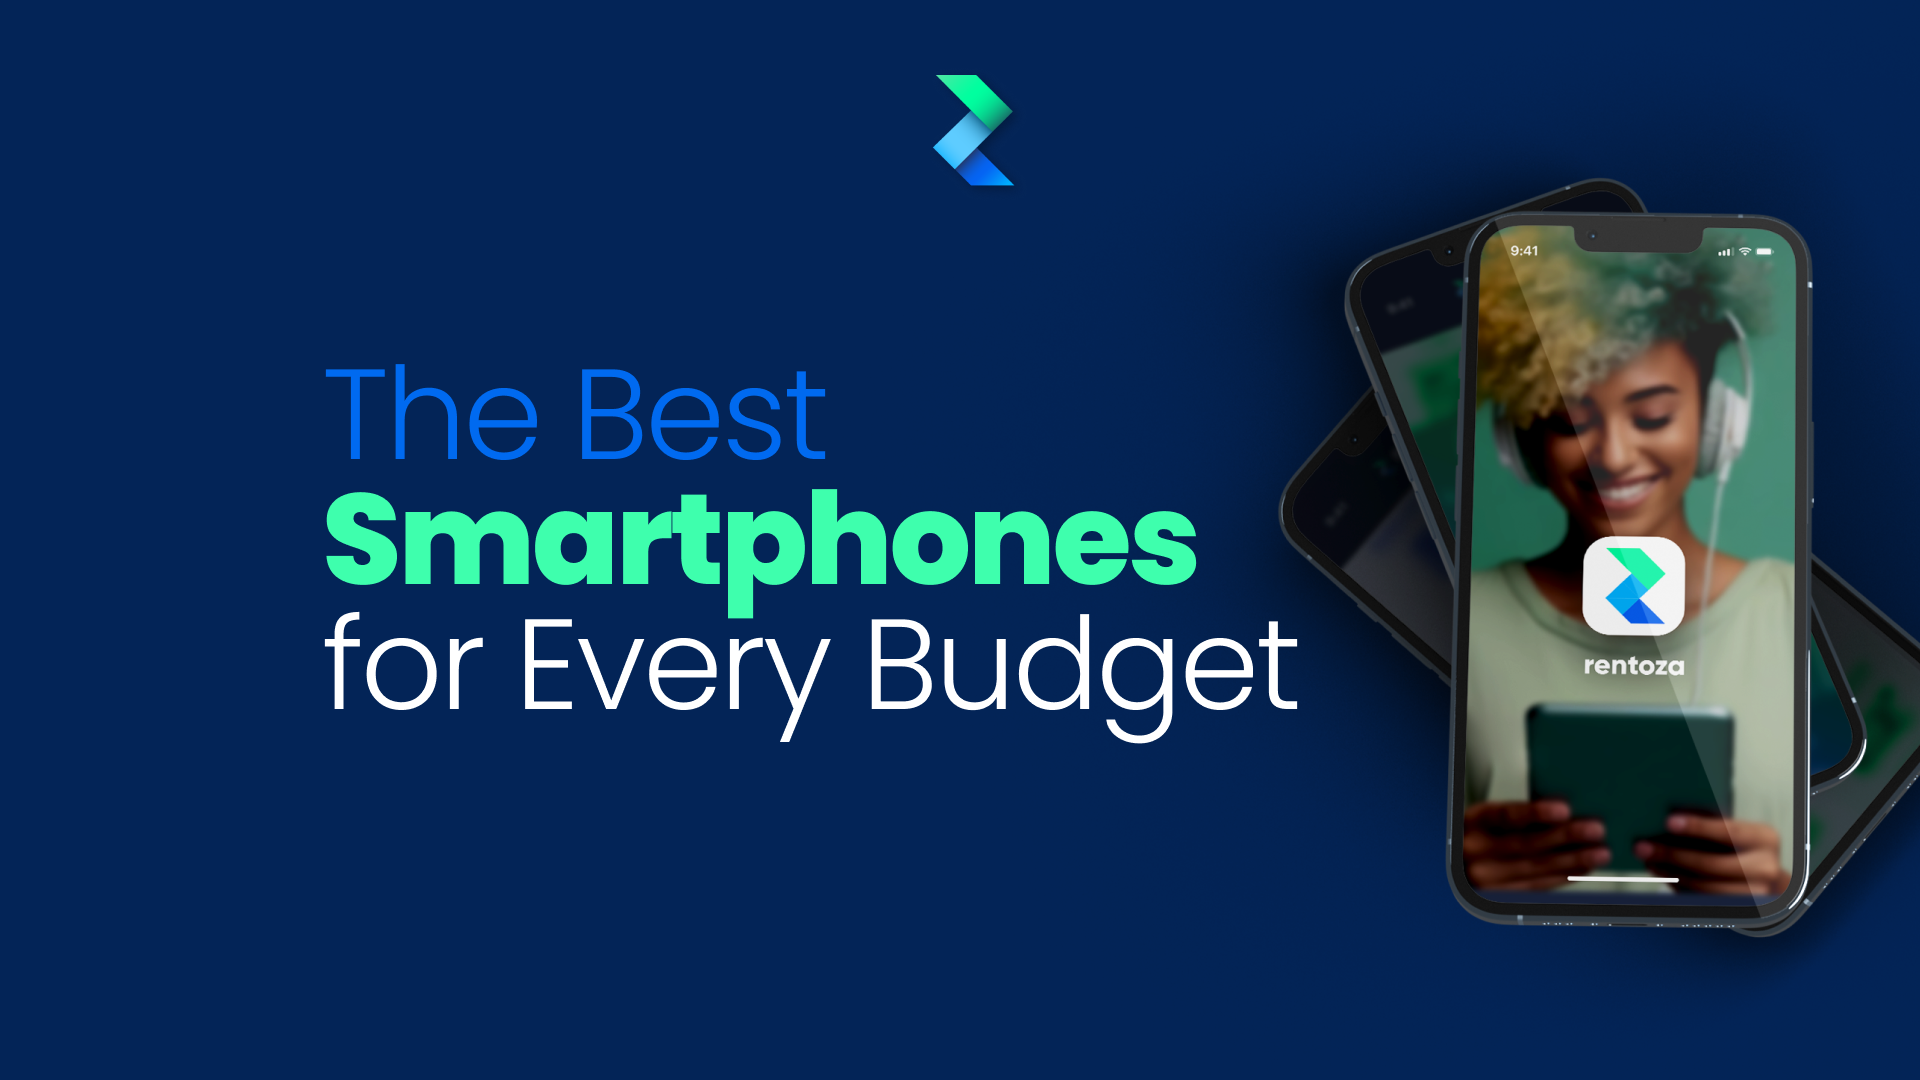 The Best Smartphones for Every Budget